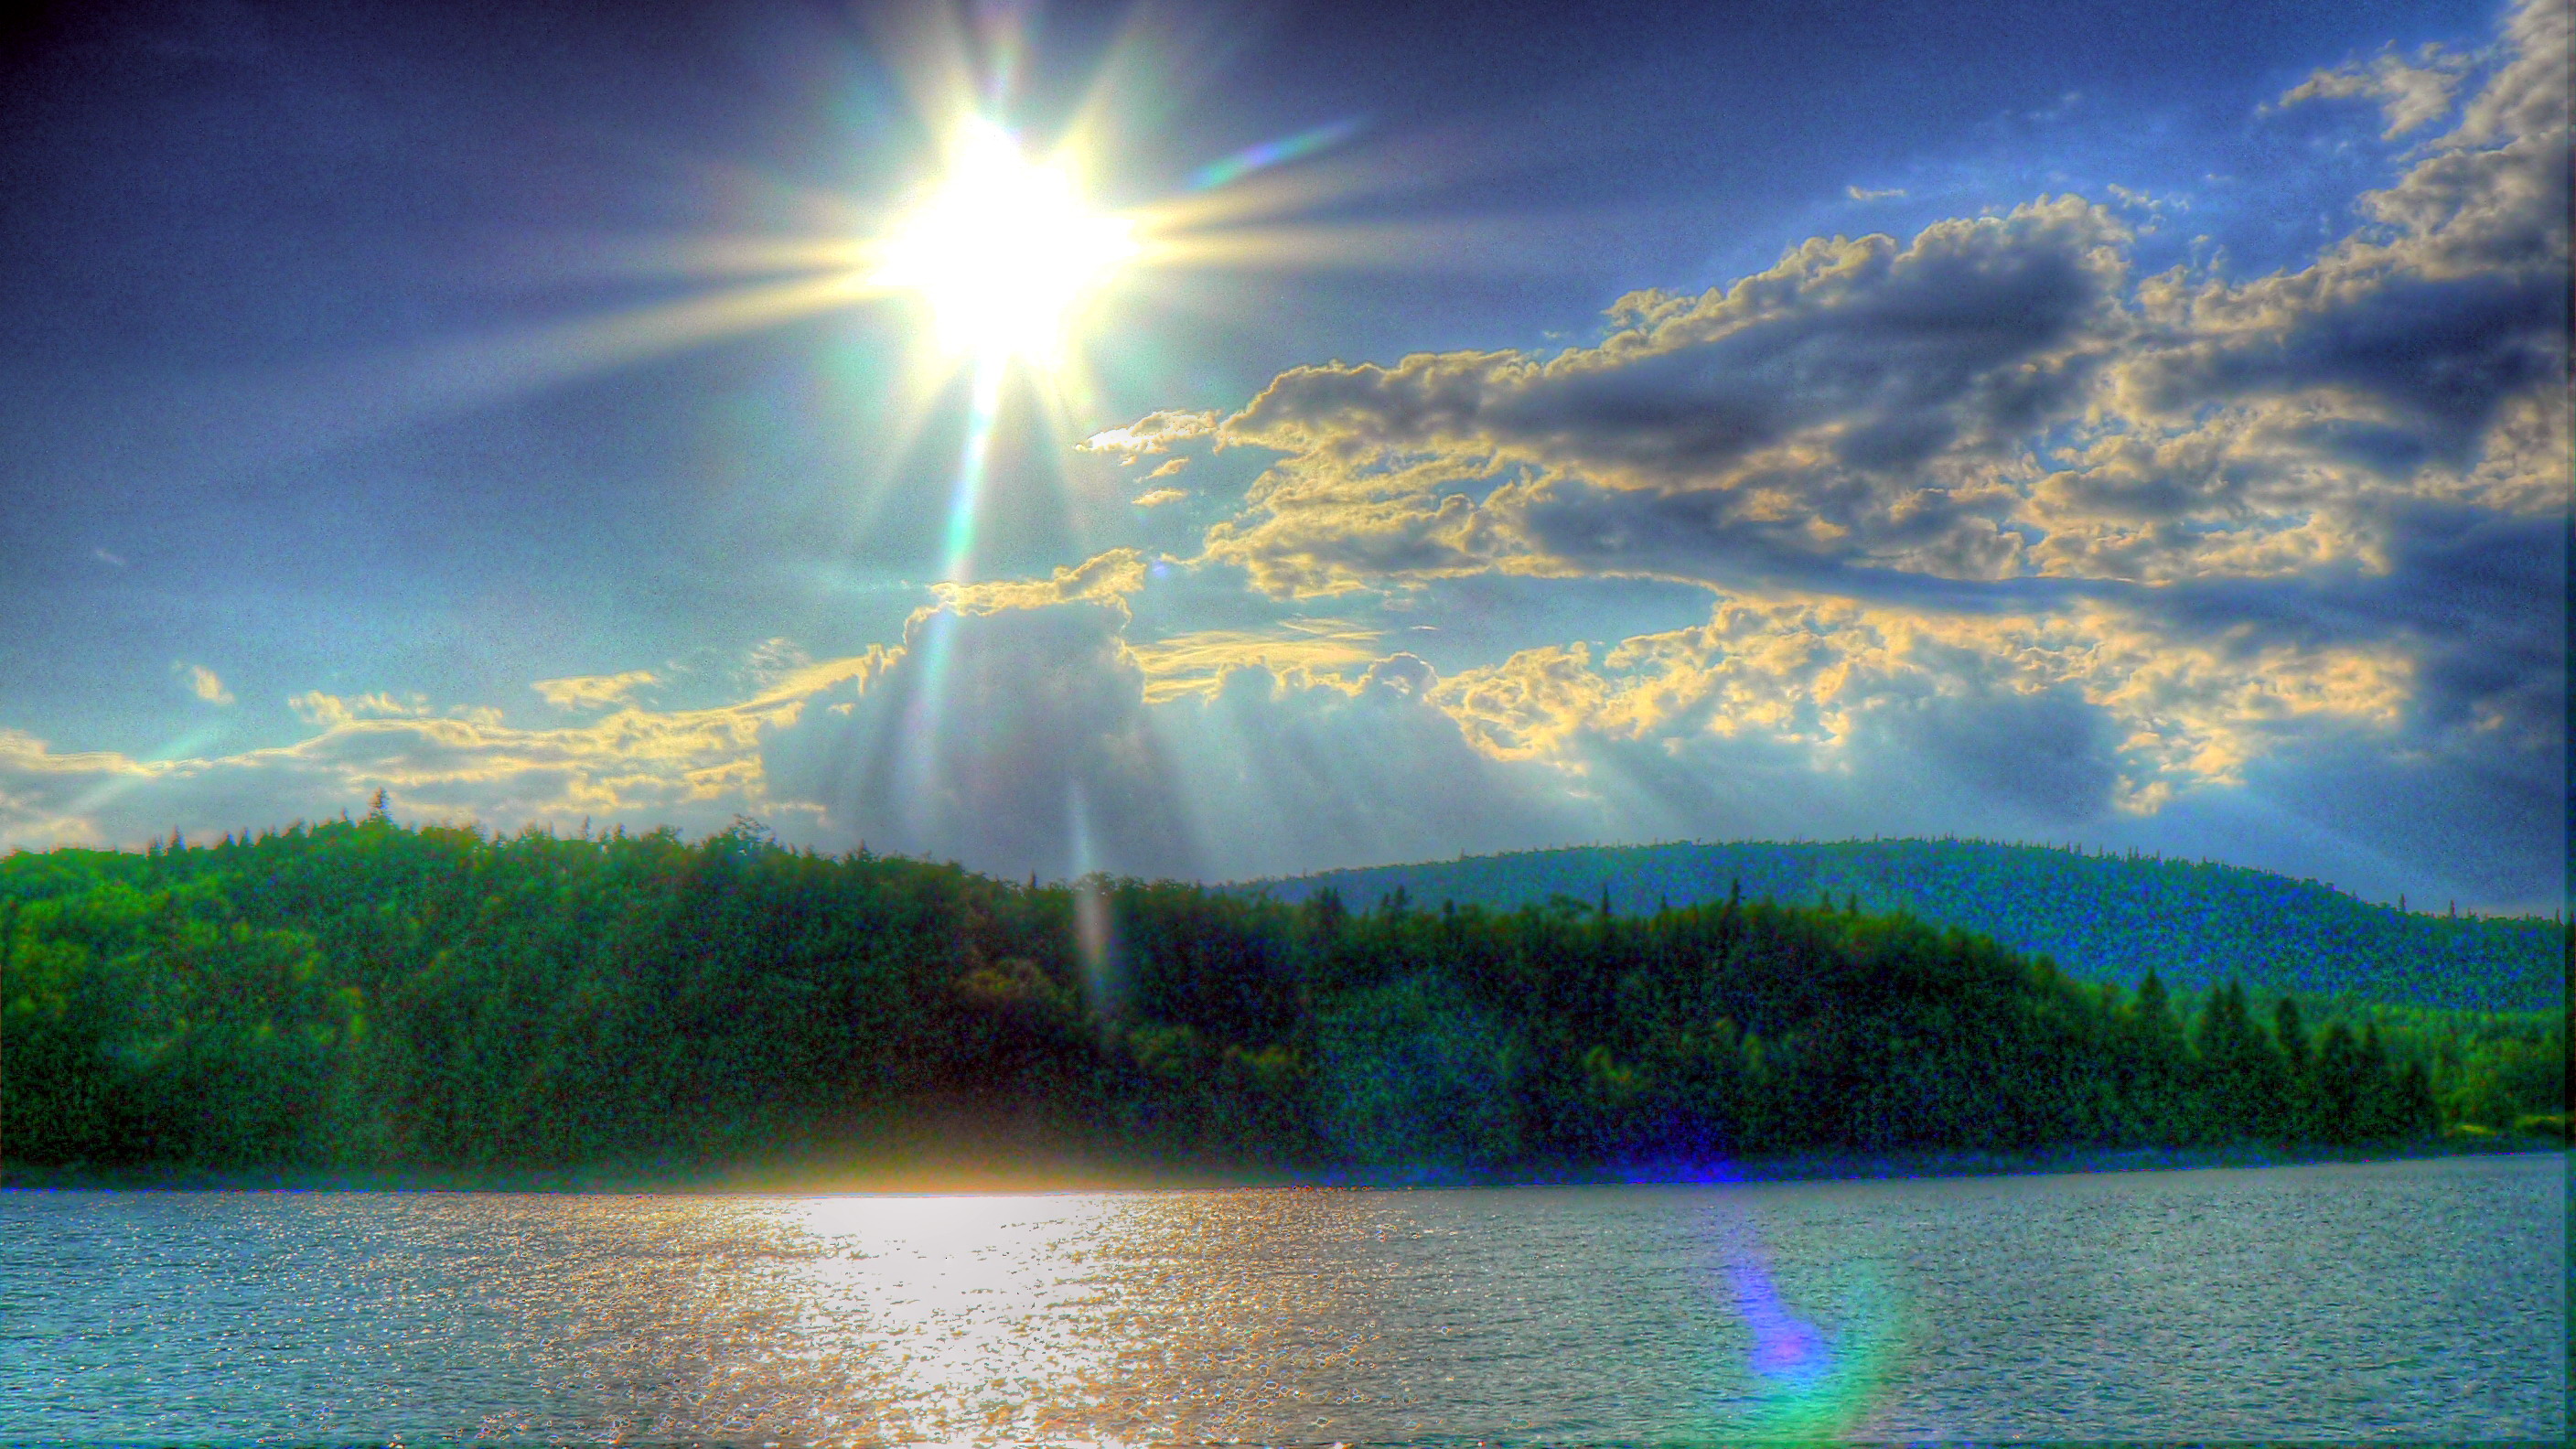 The stunning HDR photo showcases a majestic sky reflecting off a calm lake, with the vibrant sun shining brightly.